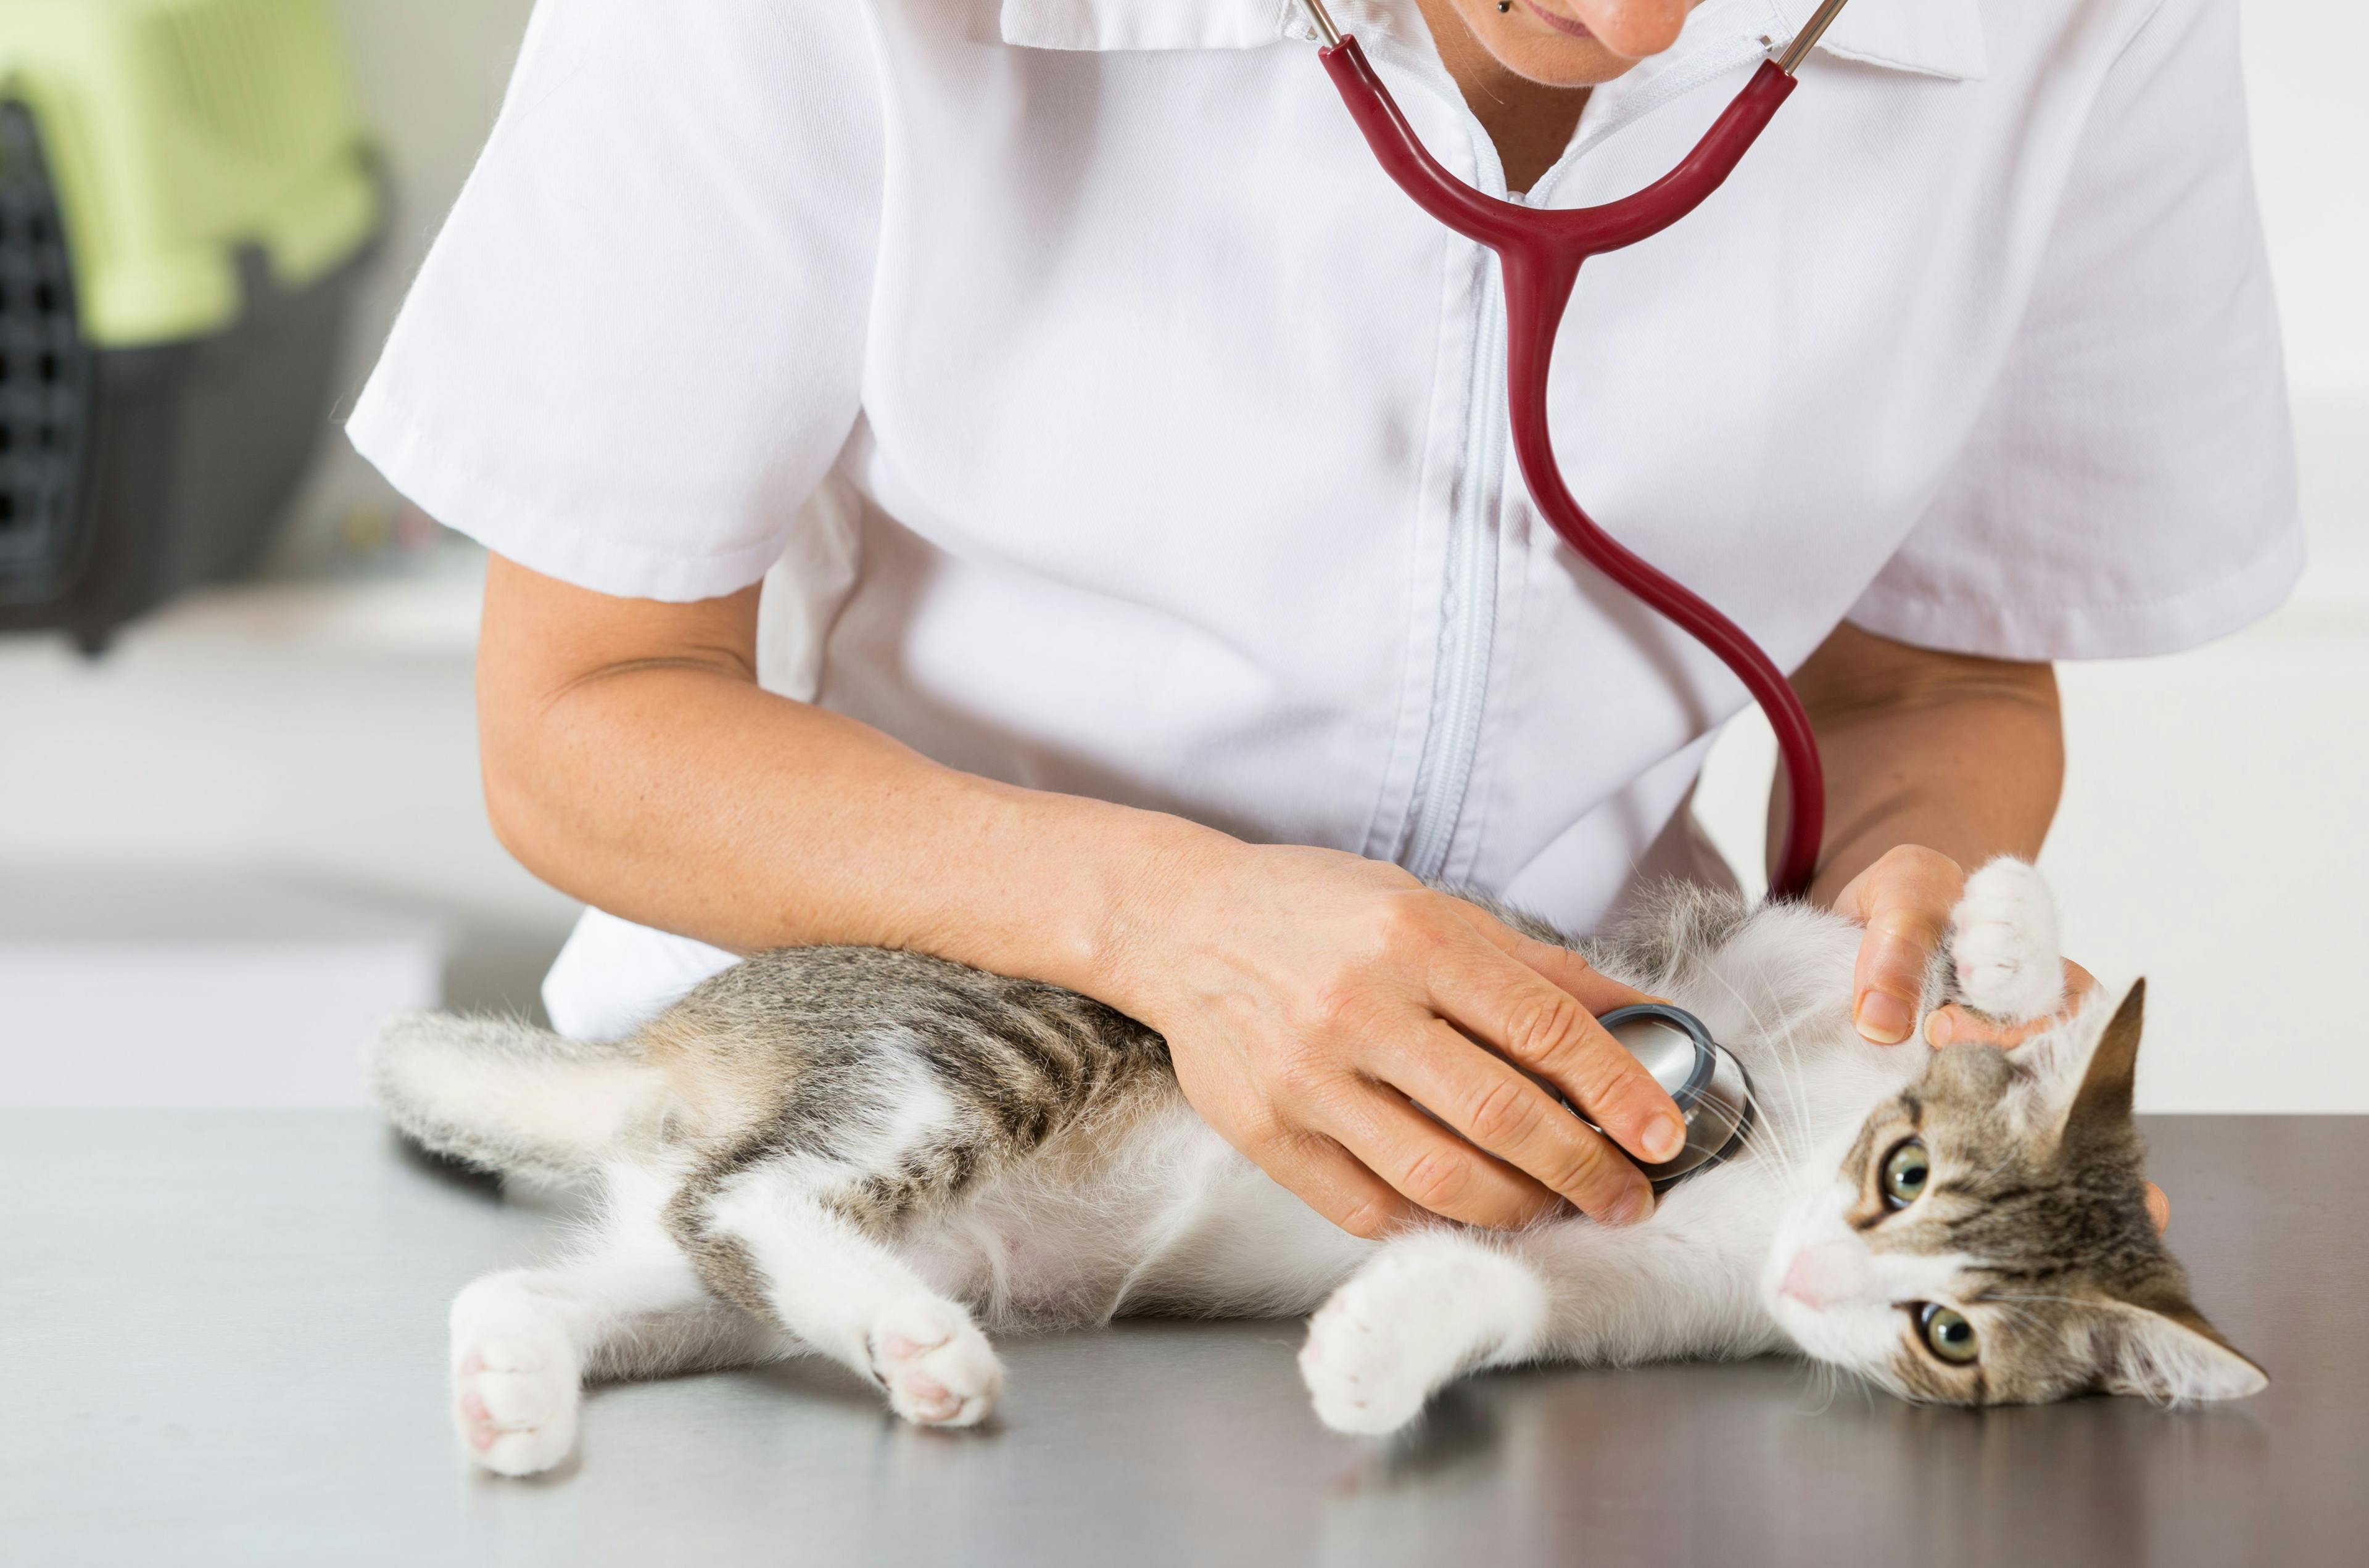 Basepaws teams up with FirstVet to alleviate veterinary practices 